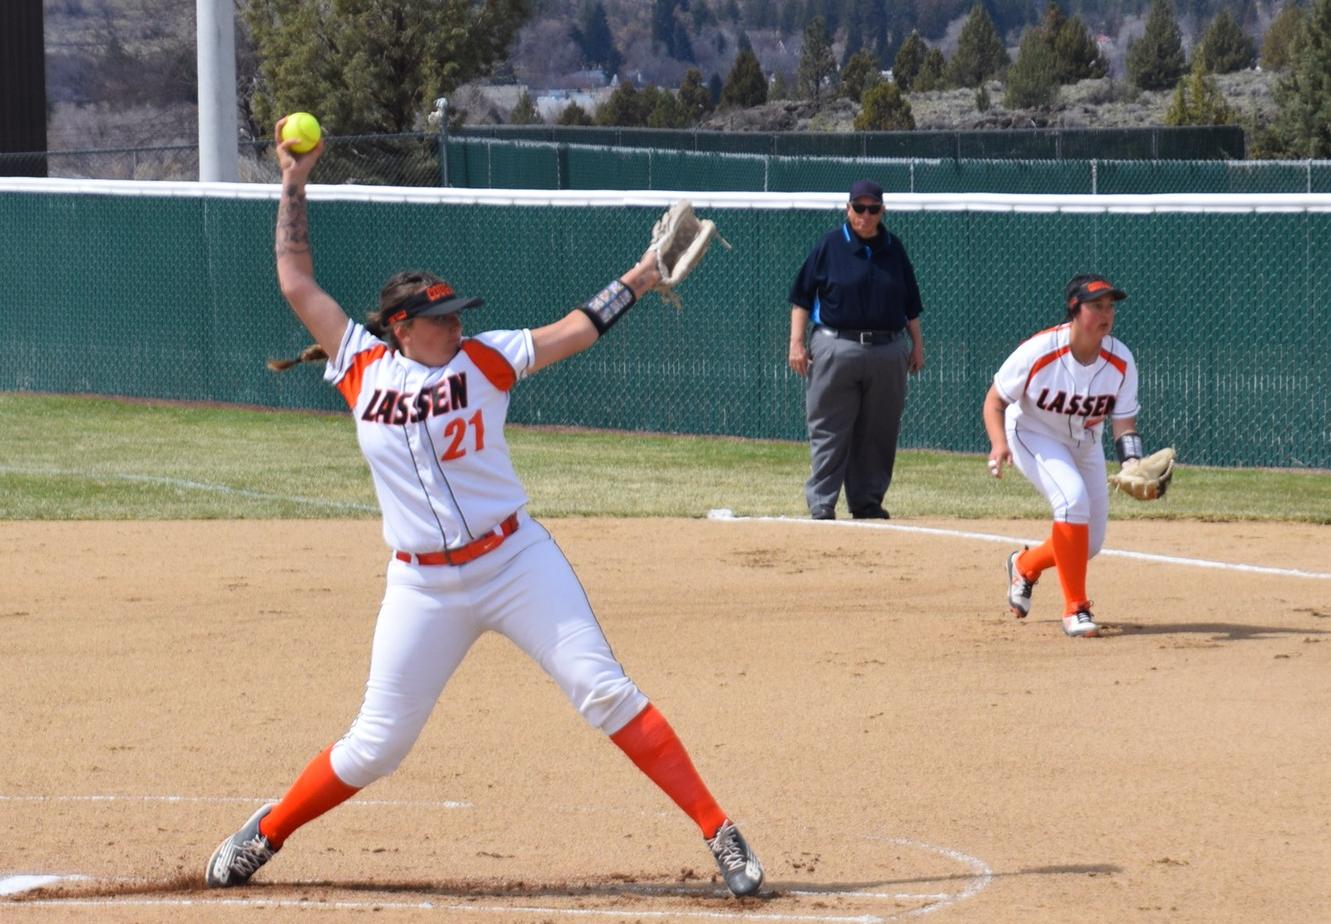 Cougars fall to Shasta in the opening game of the doubleheader